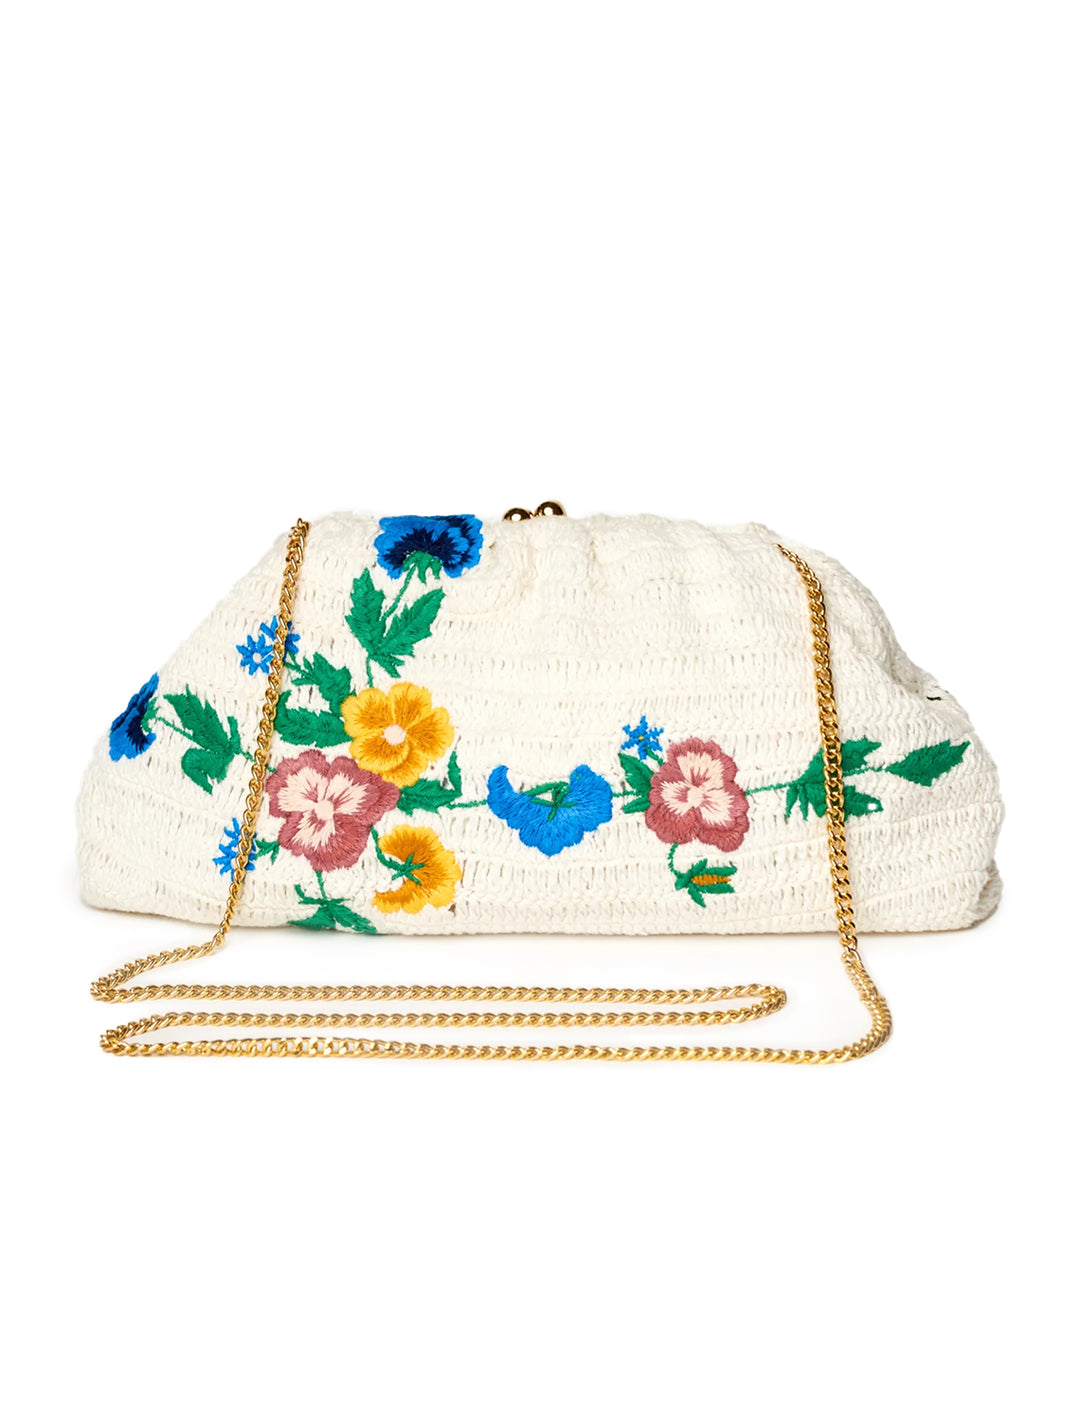 Front view of M.A.B.E.'s vela embroidered crochet clutch.